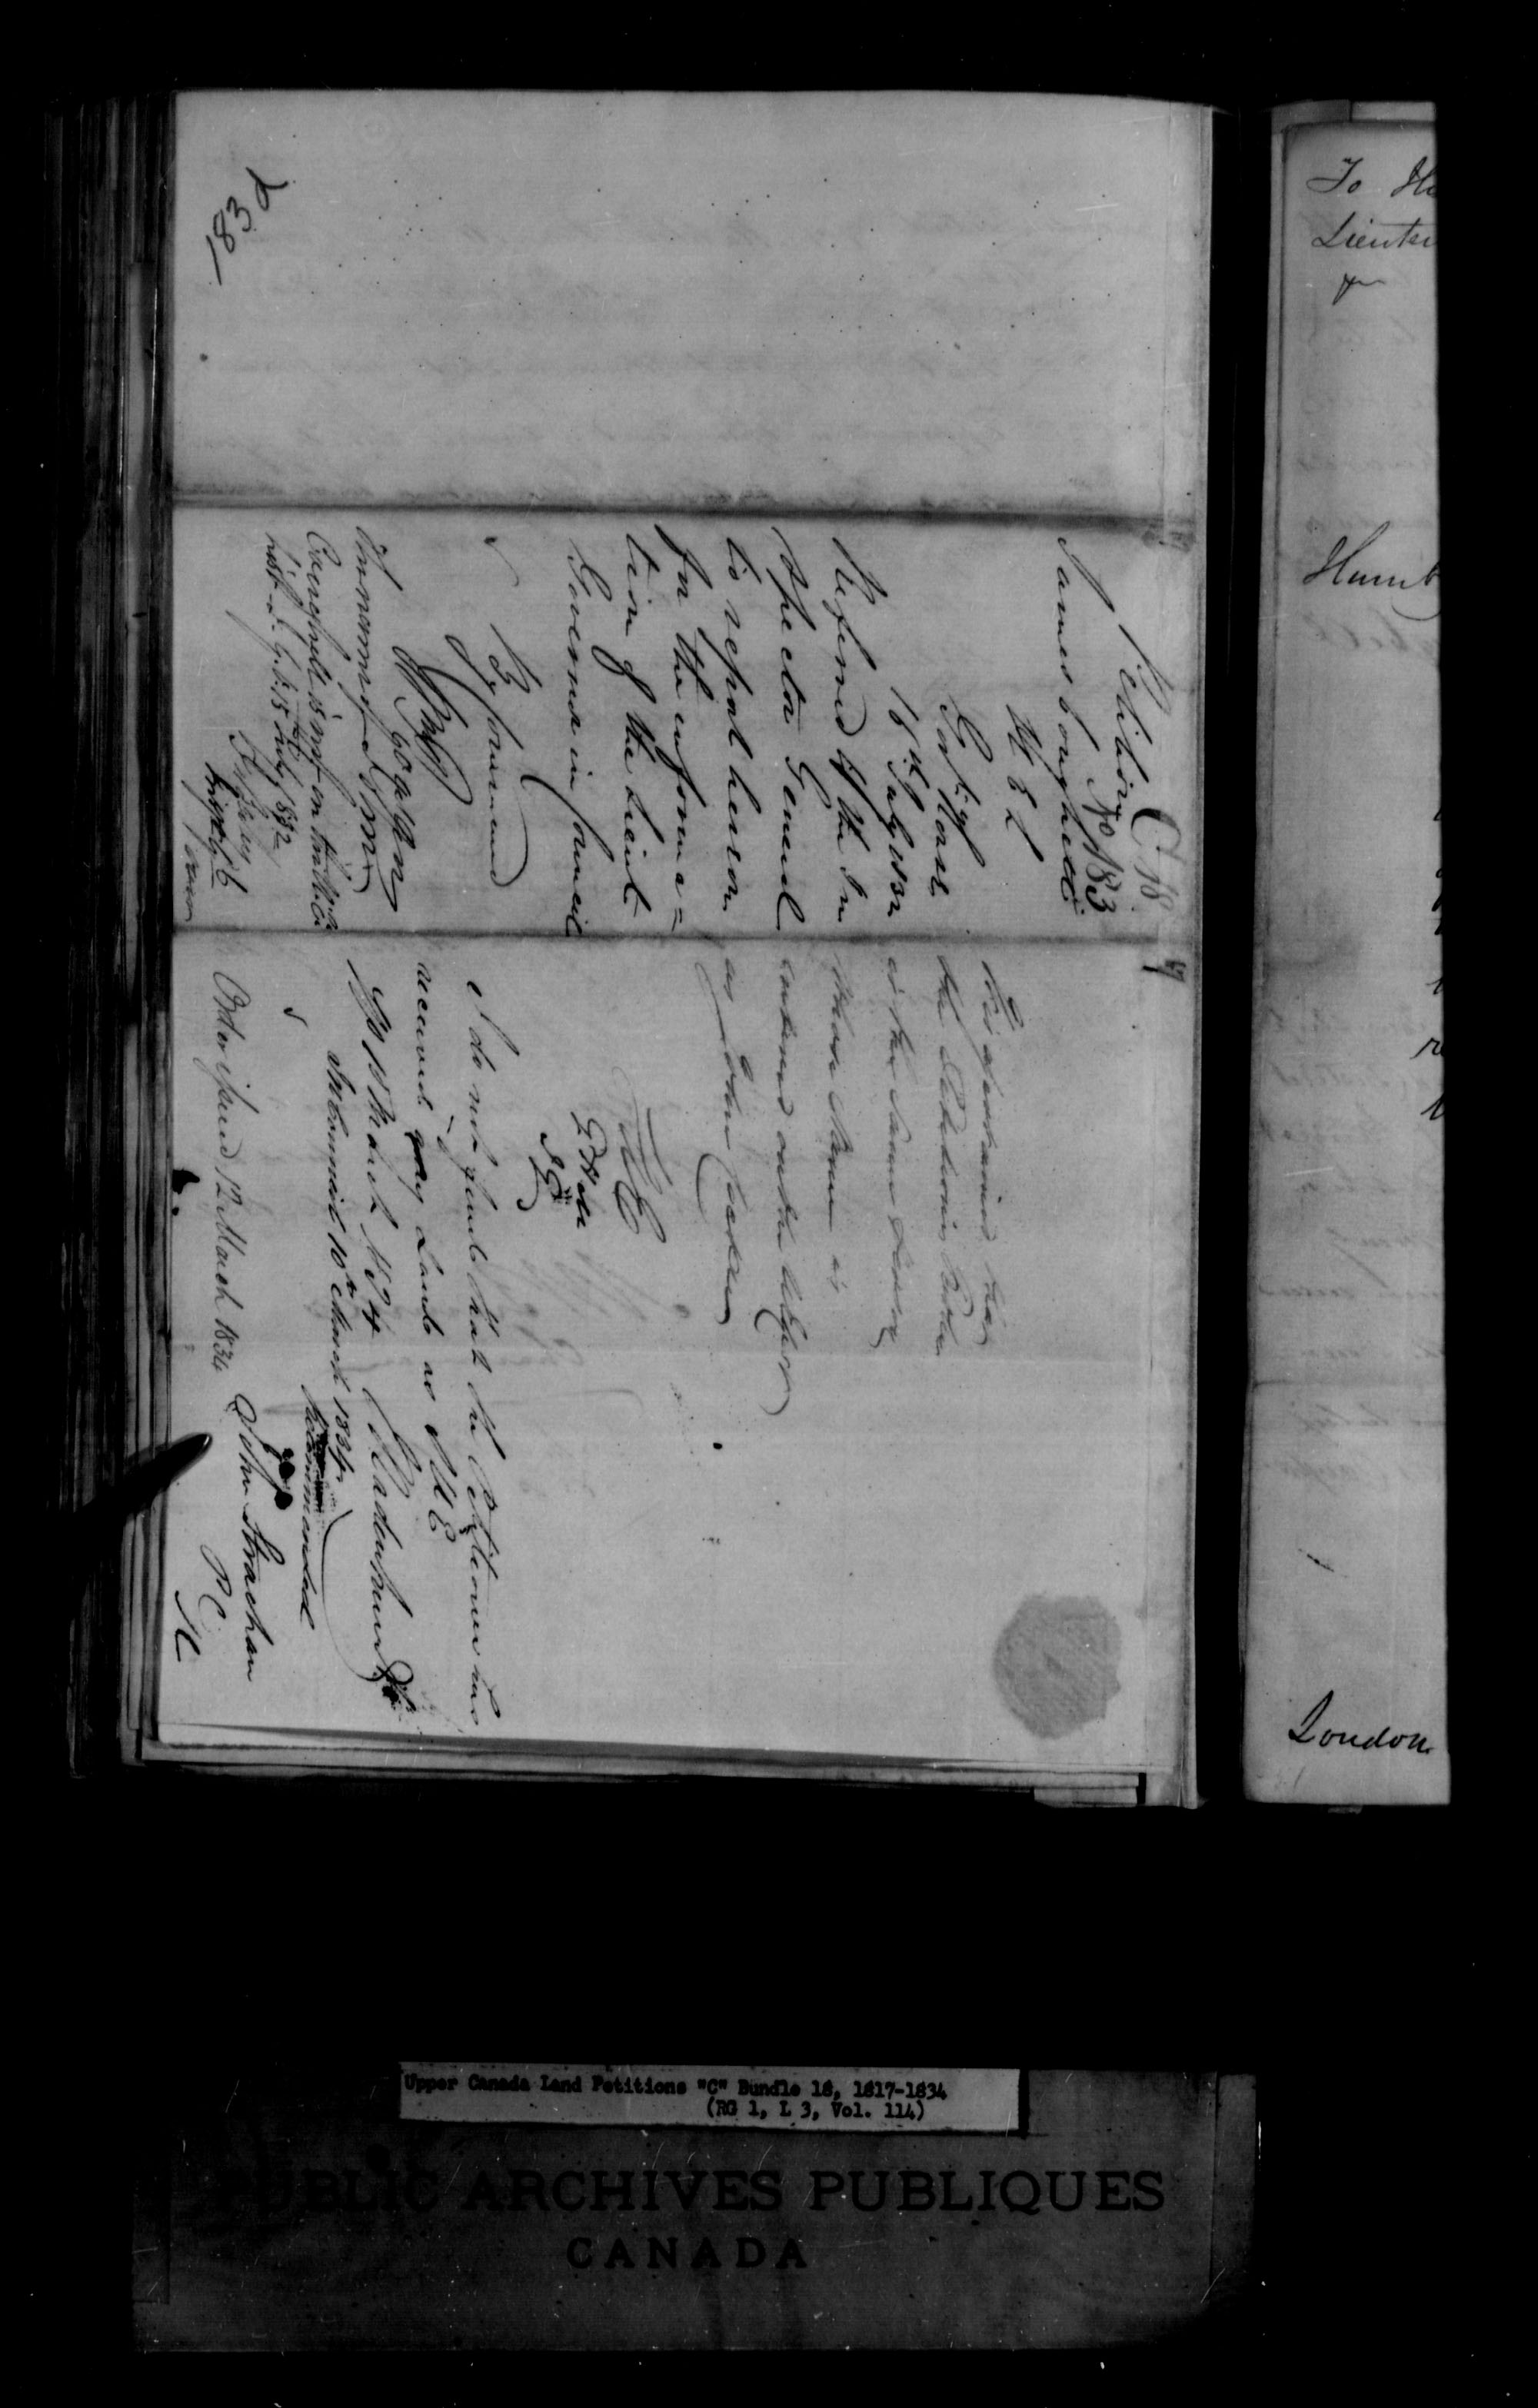 Title: Upper Canada Land Petitions (1763-1865) - Mikan Number: 205131 - Microform: c-1727